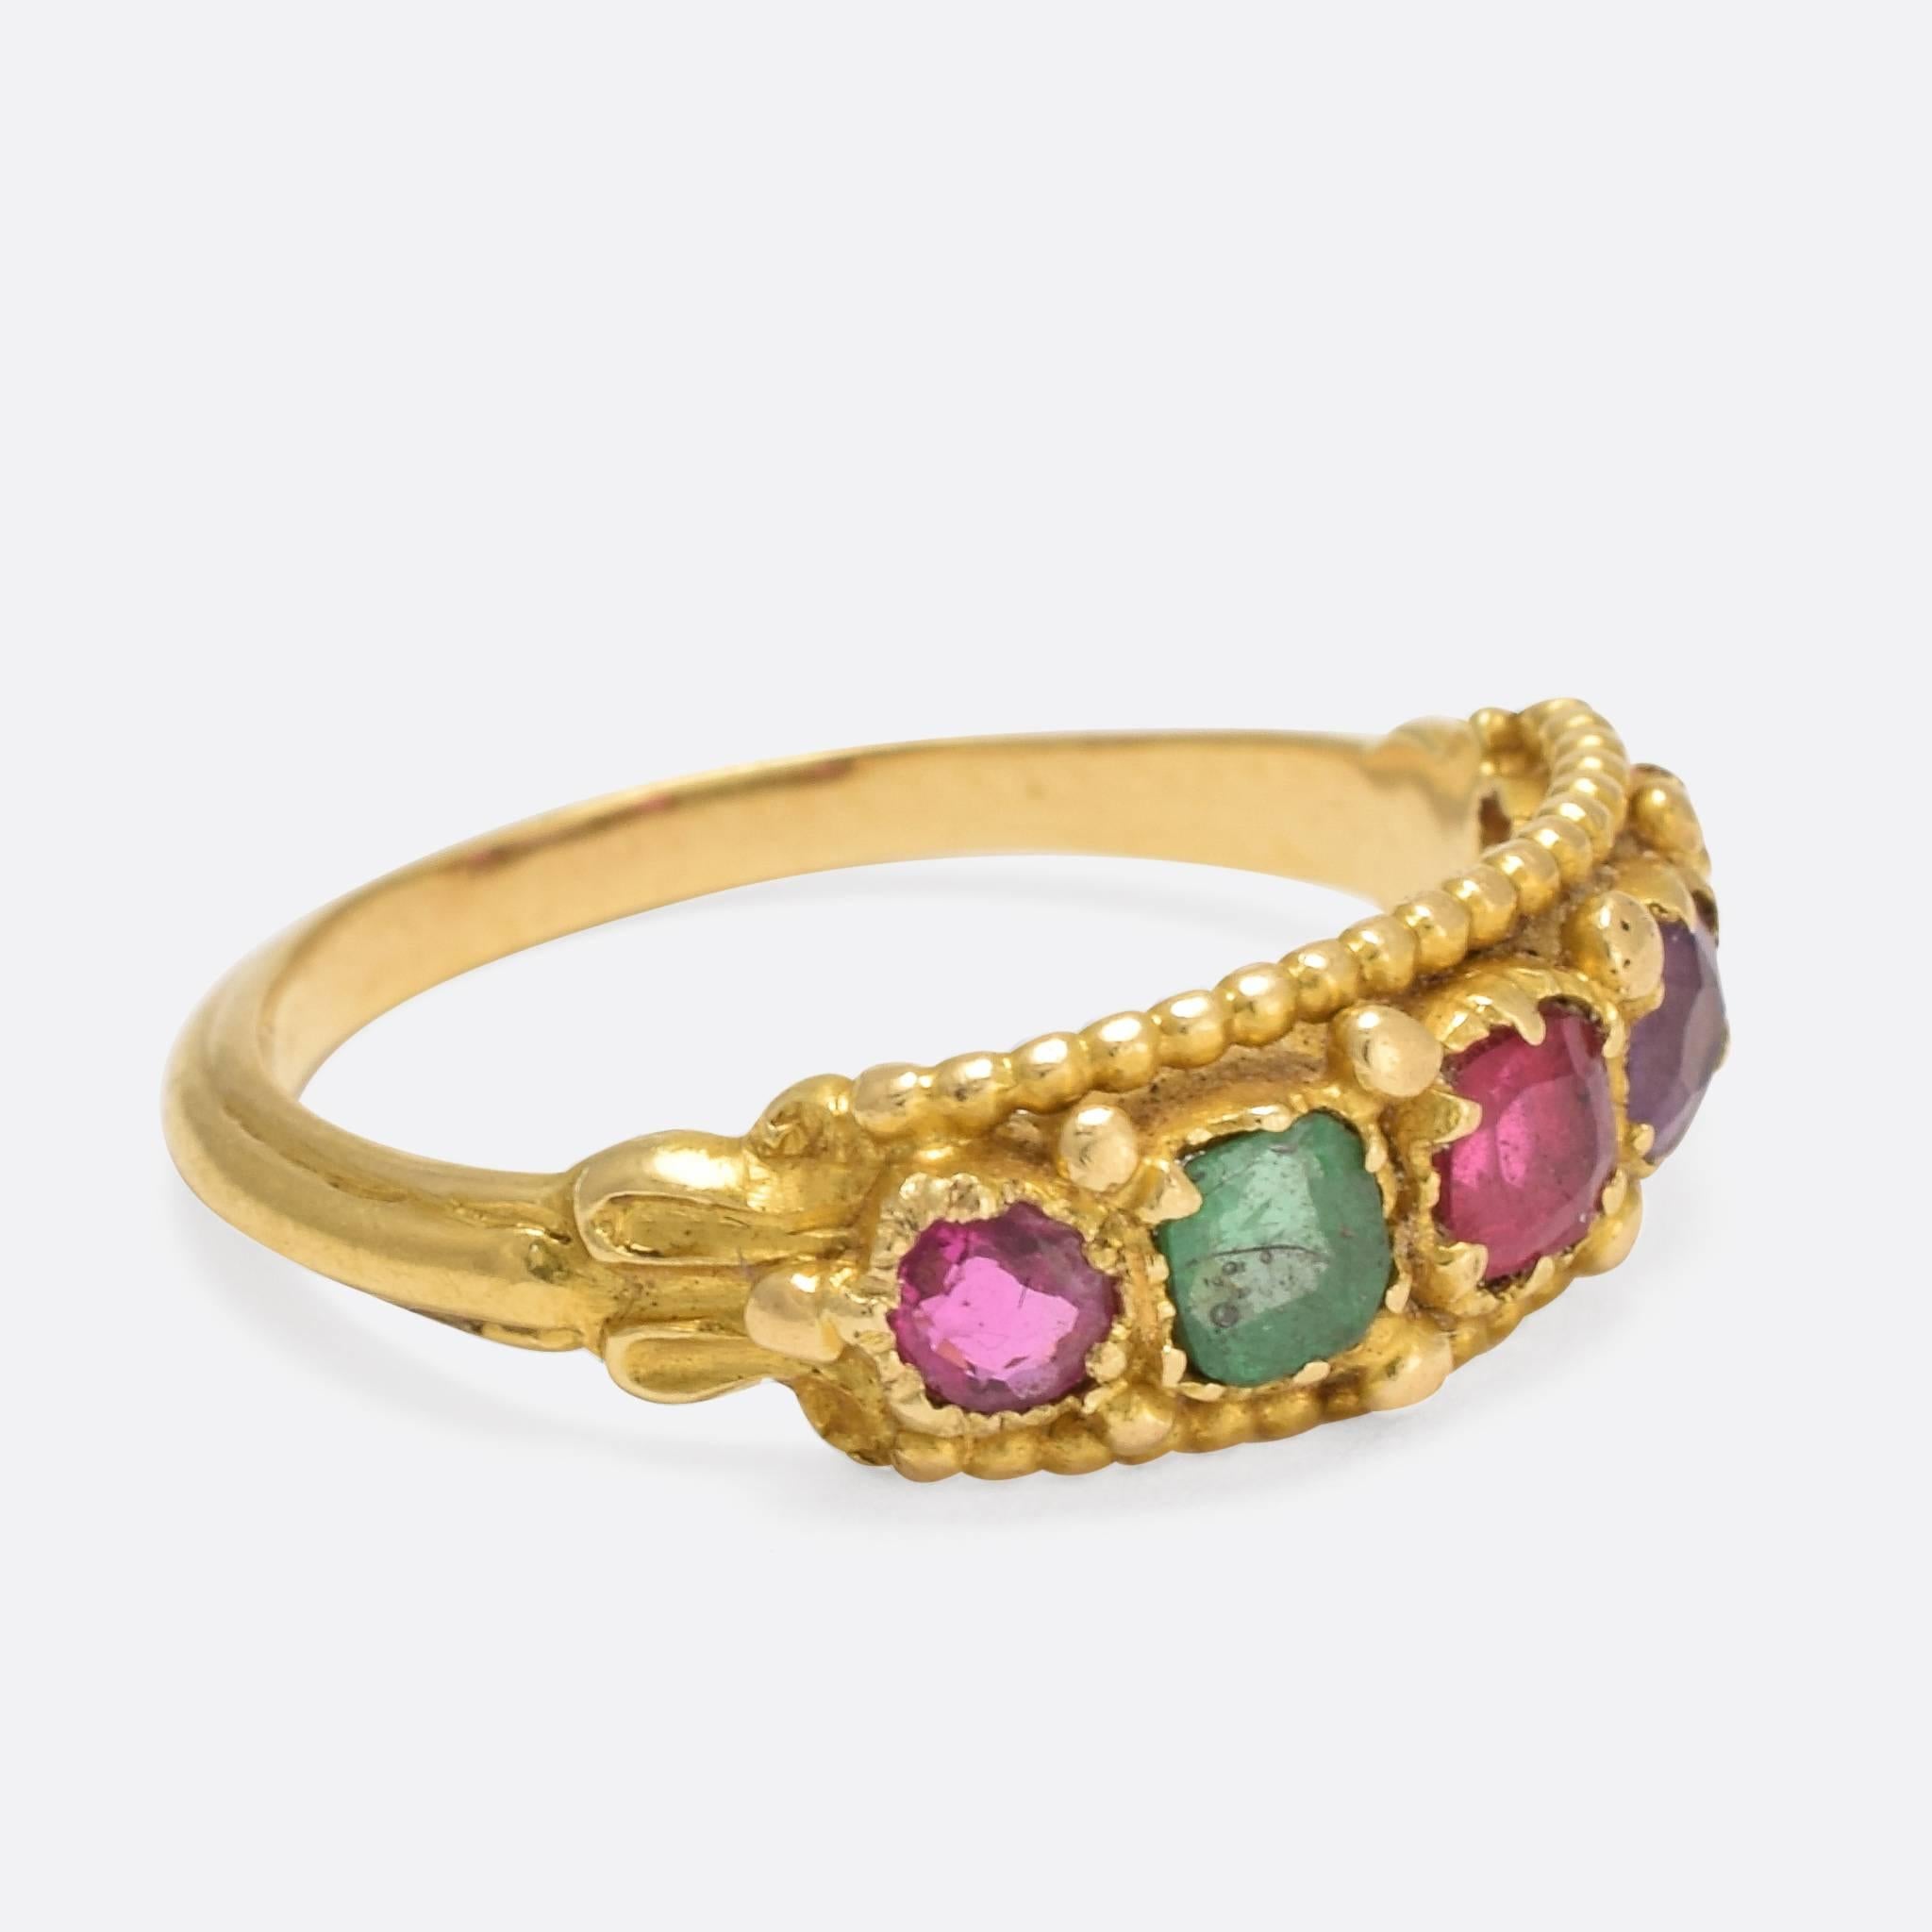 This pretty antique ring was made in England at the height of the Etruscan Revival - c.1880. It is set with a selection of colourful gemstones: ruby, emerald, garnet, and amethyst, and features the pommelled goldwork typical of the style. Modelled